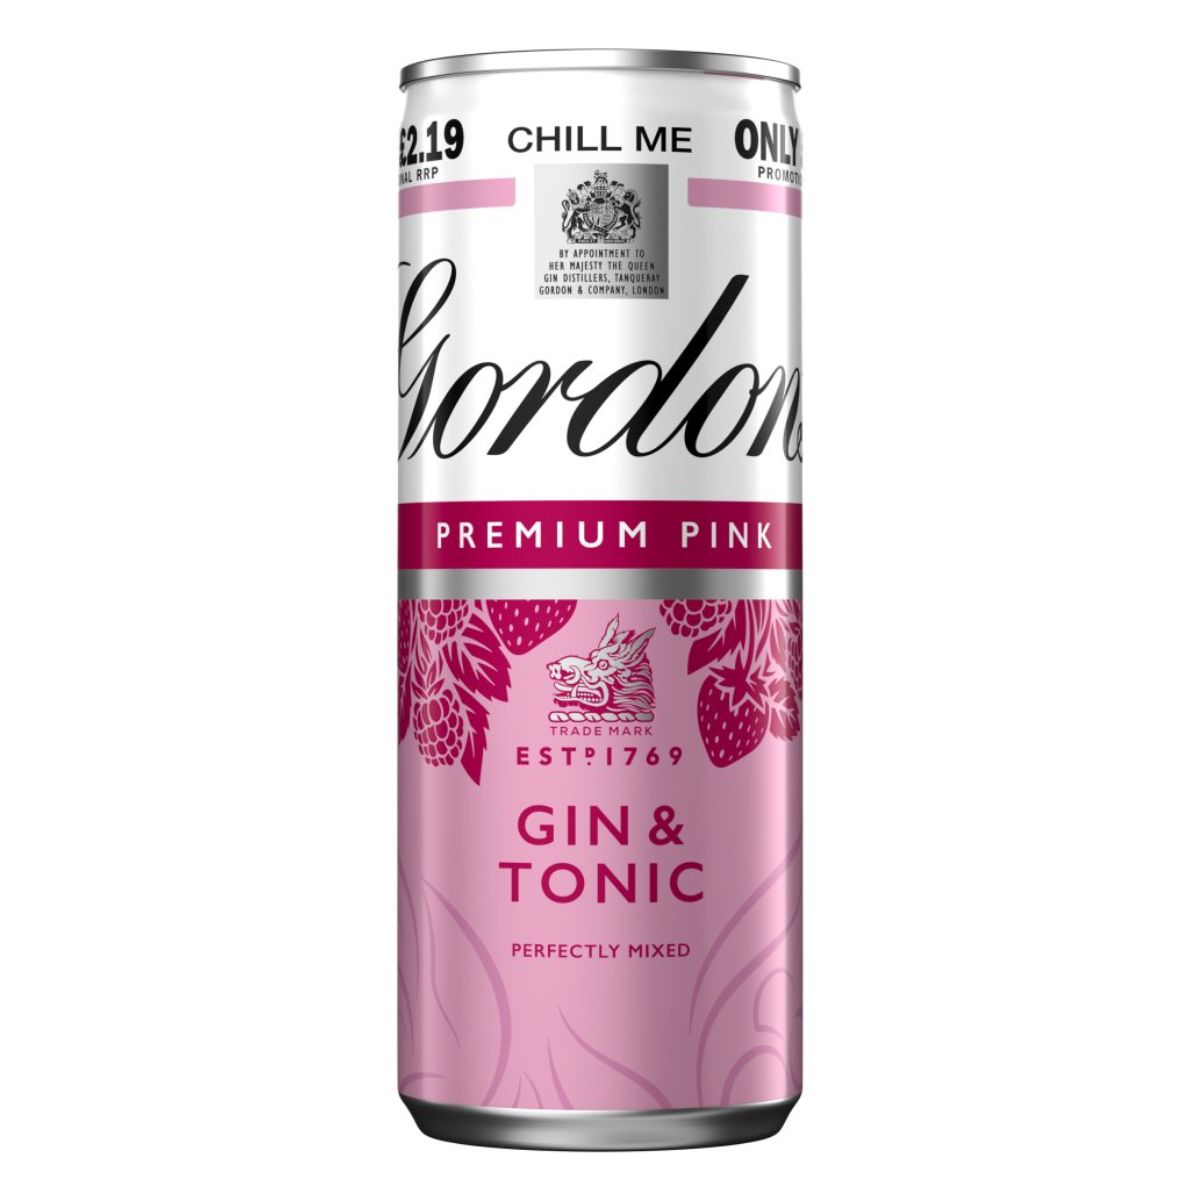 A Gordons - Premium Pink Gin & Tonic (5.0% ABV) - 250ml on a white background.